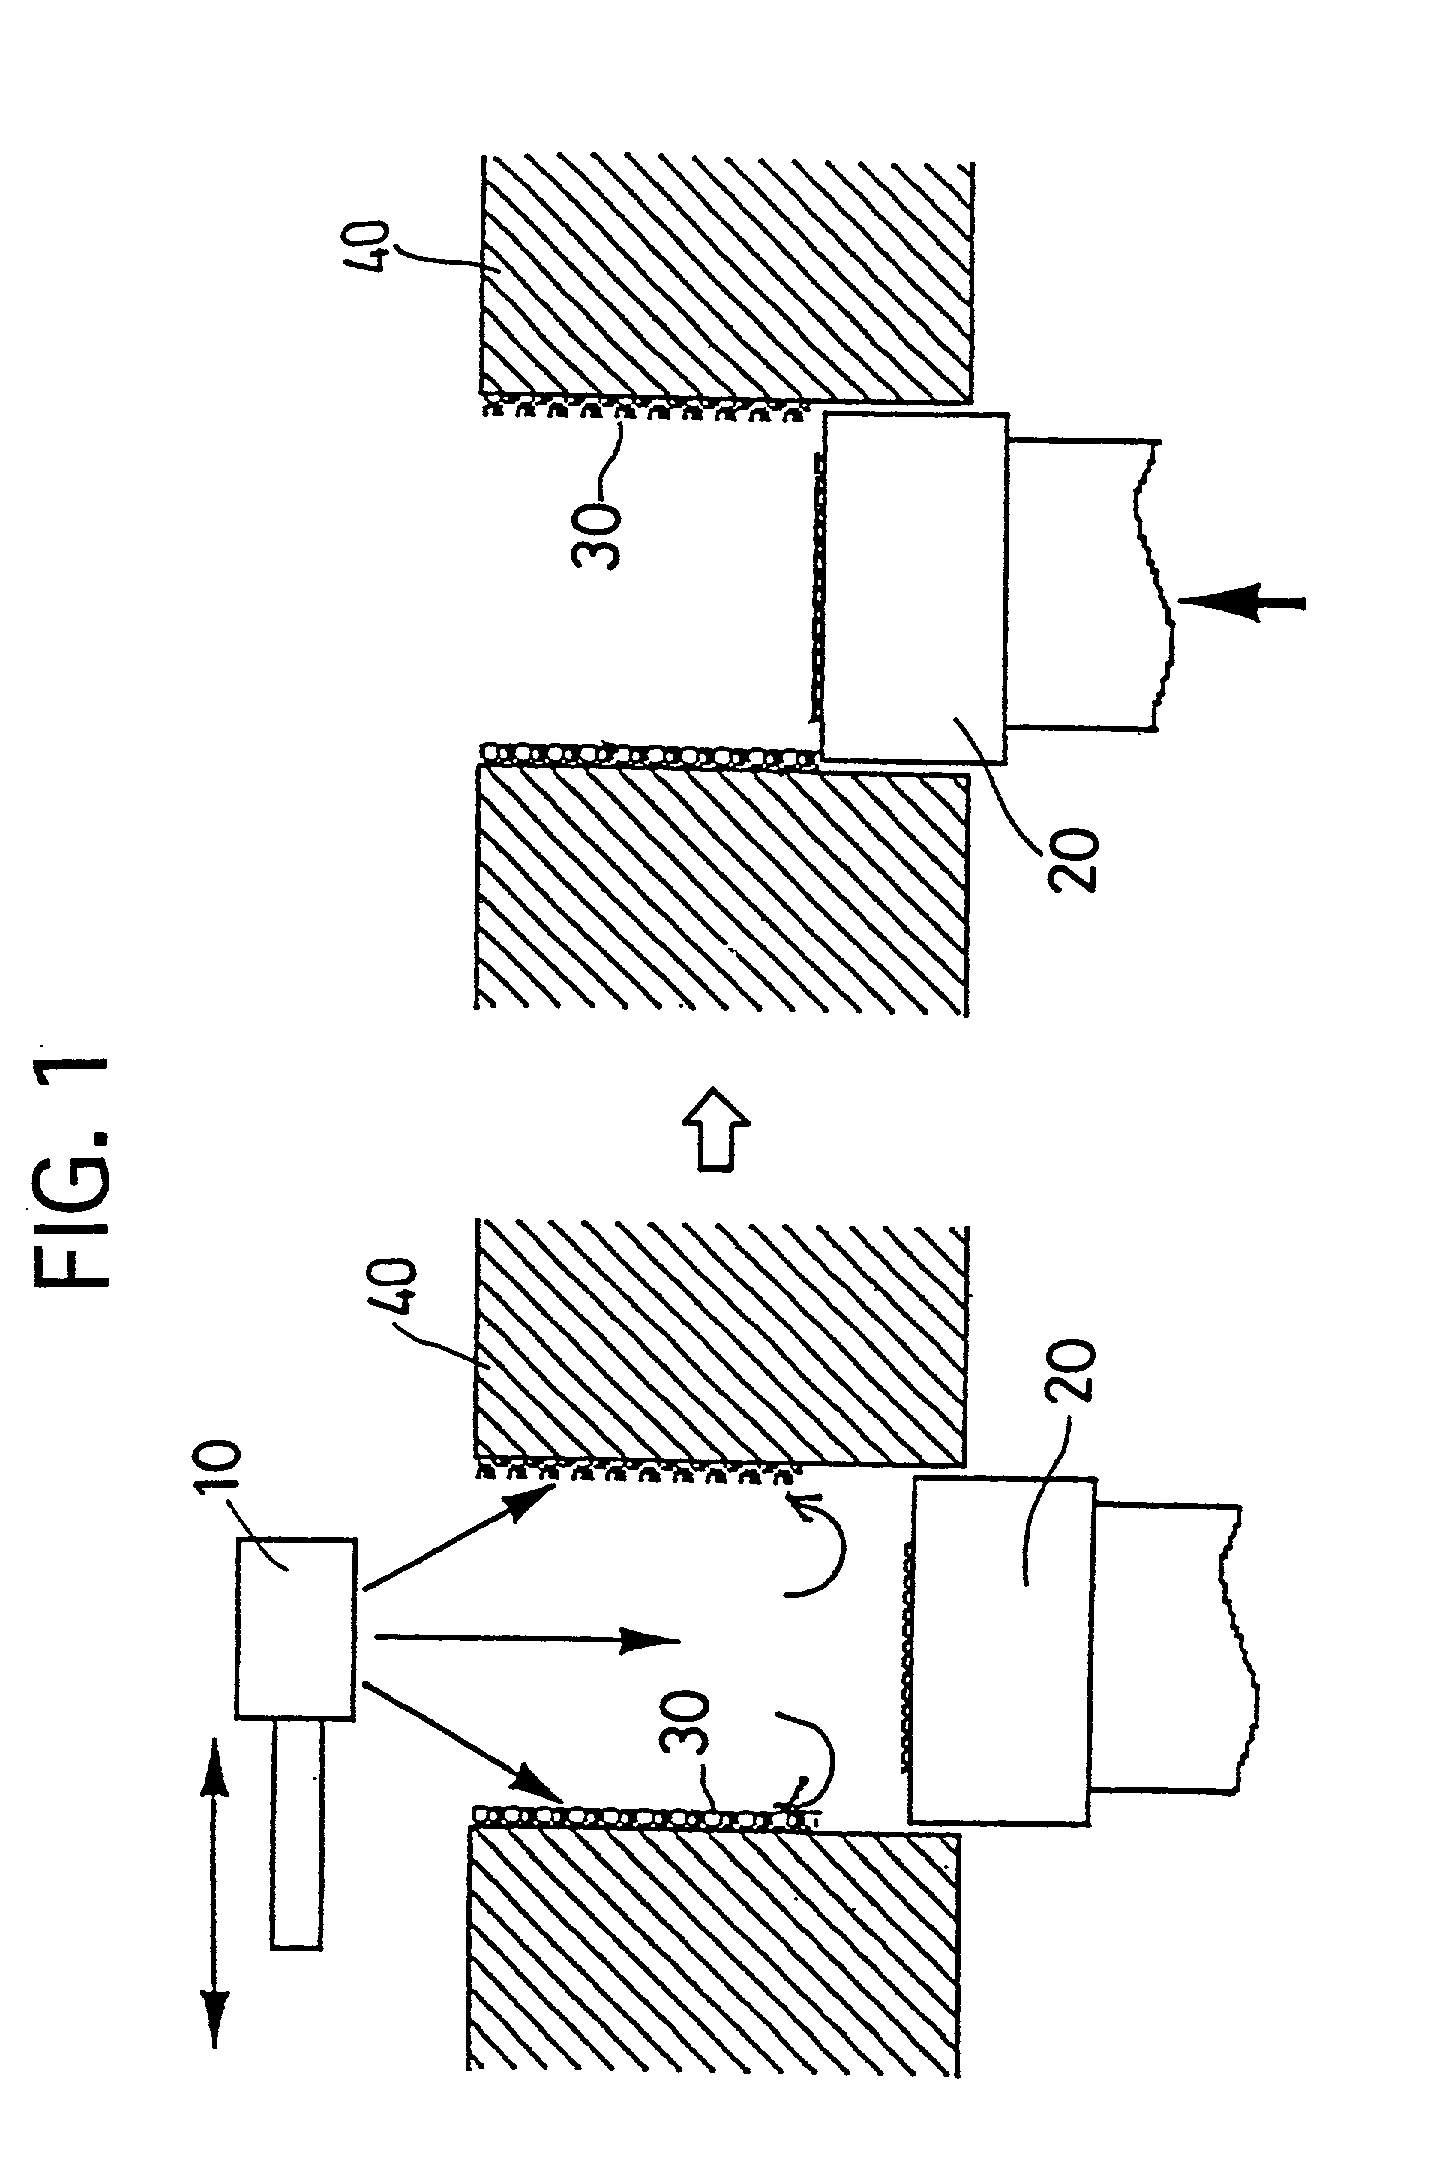 Method of forming a powder compact